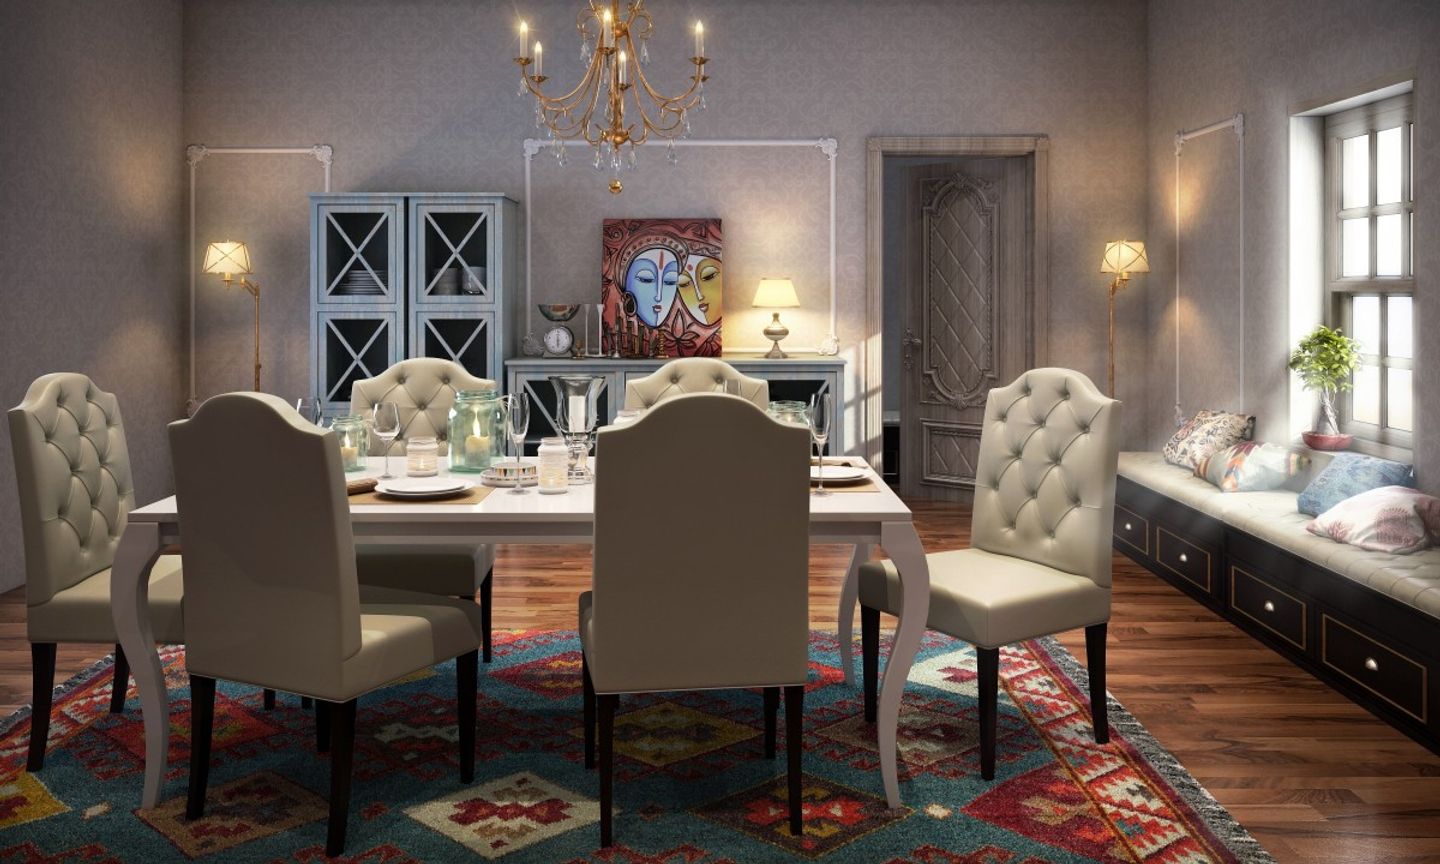 Modern 6-Seater White And Beige Dining Room Design With Tufted Chairs